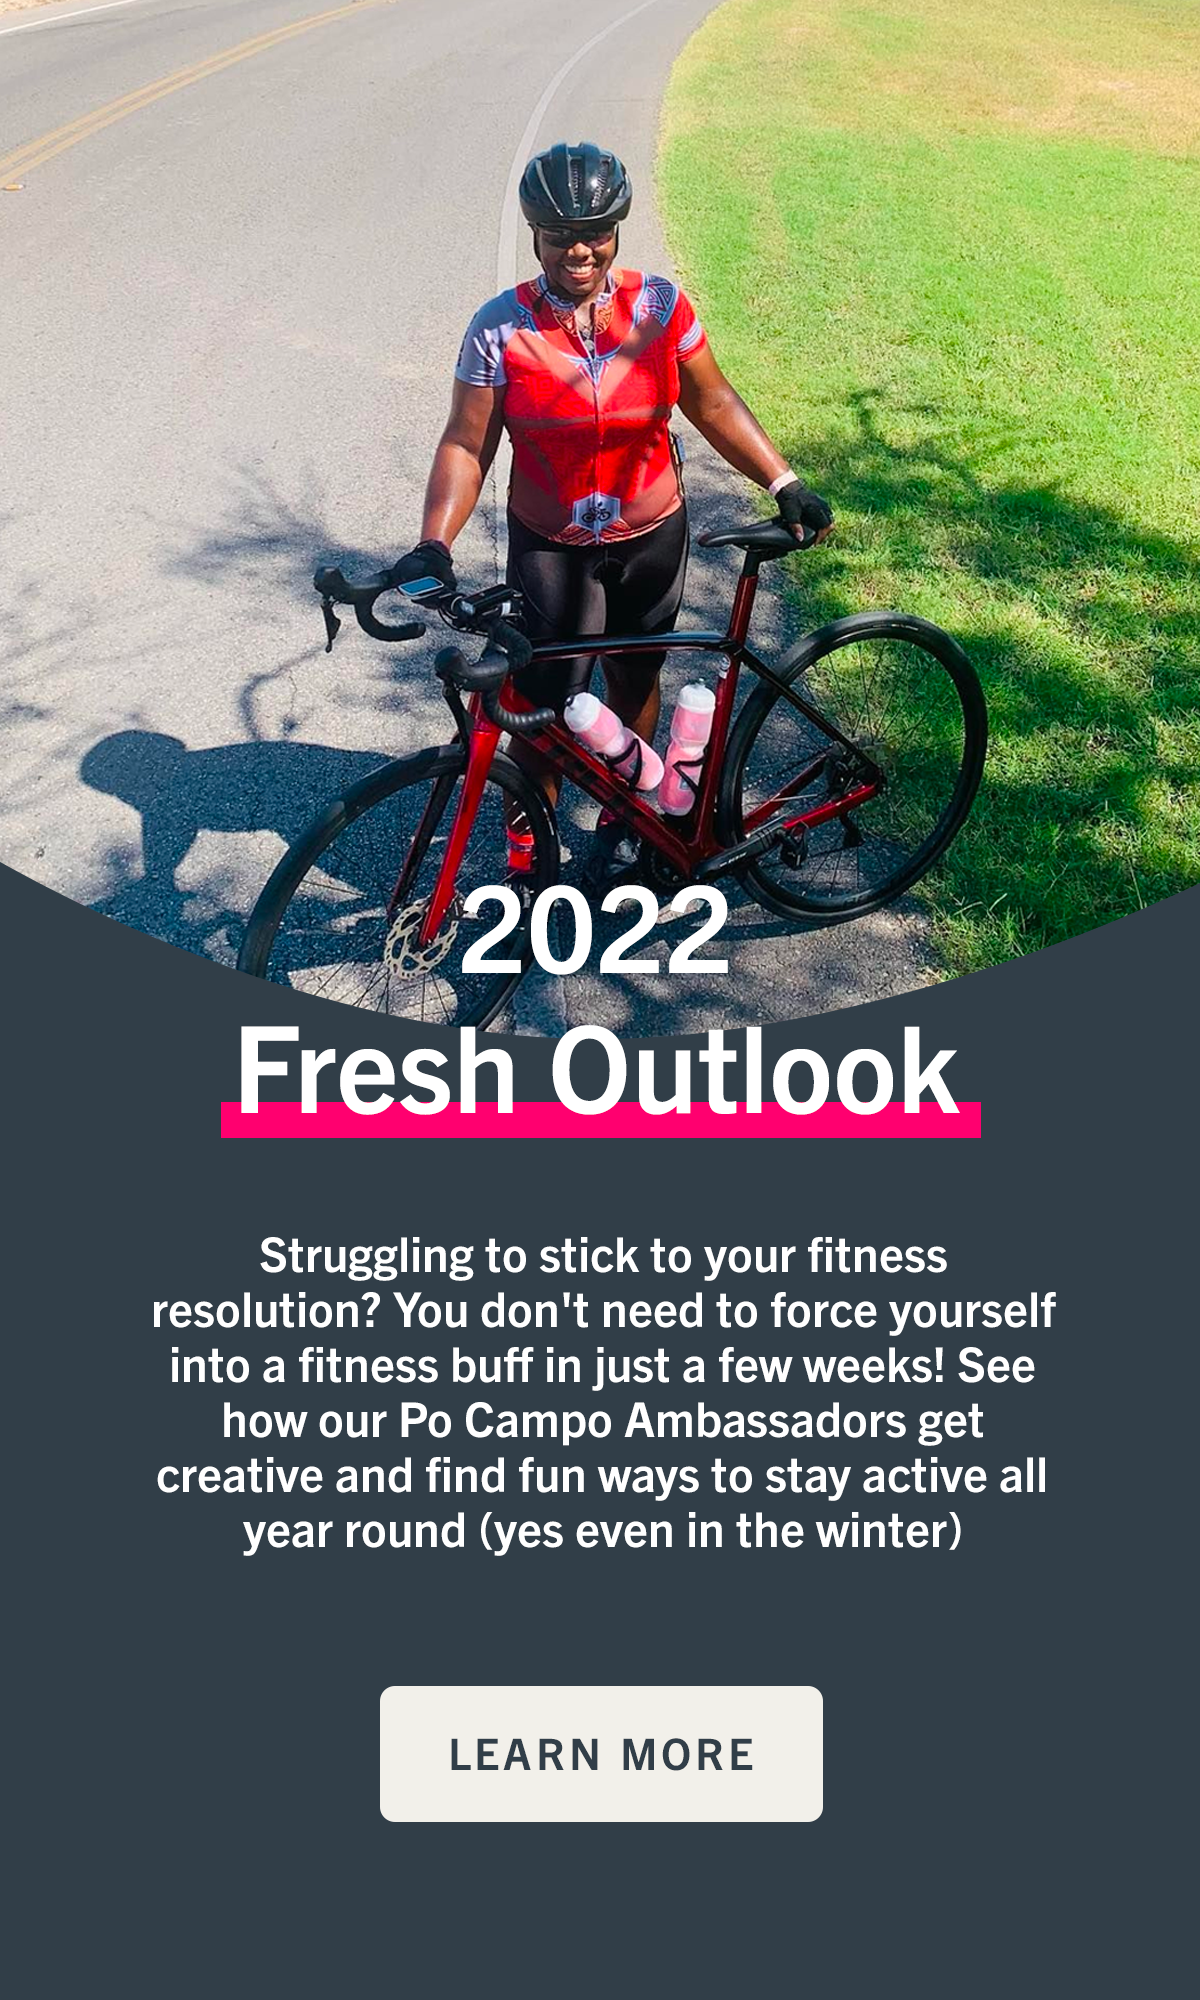 2022 Fresh Outlook - learn how to stick to your fitness resolution